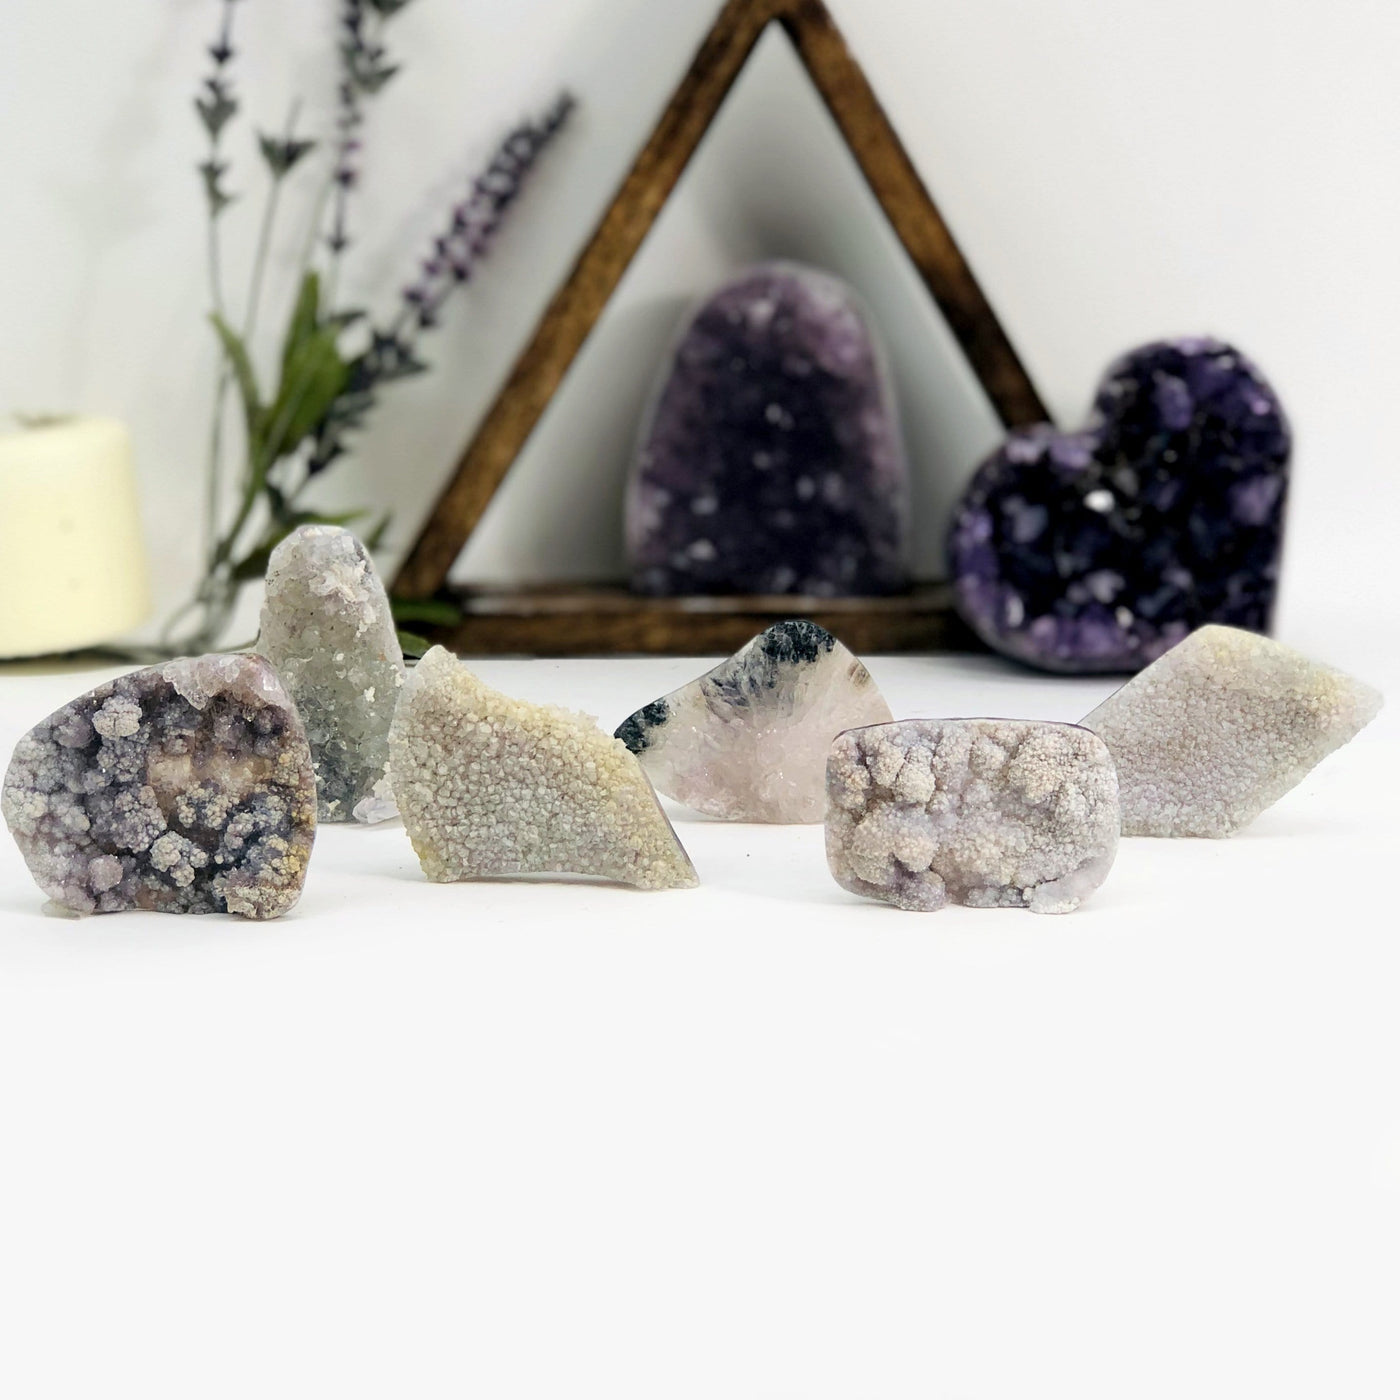 6 different hand holding up variant 2 of Amethyst Flower Crystal Clusters with decorations in the background